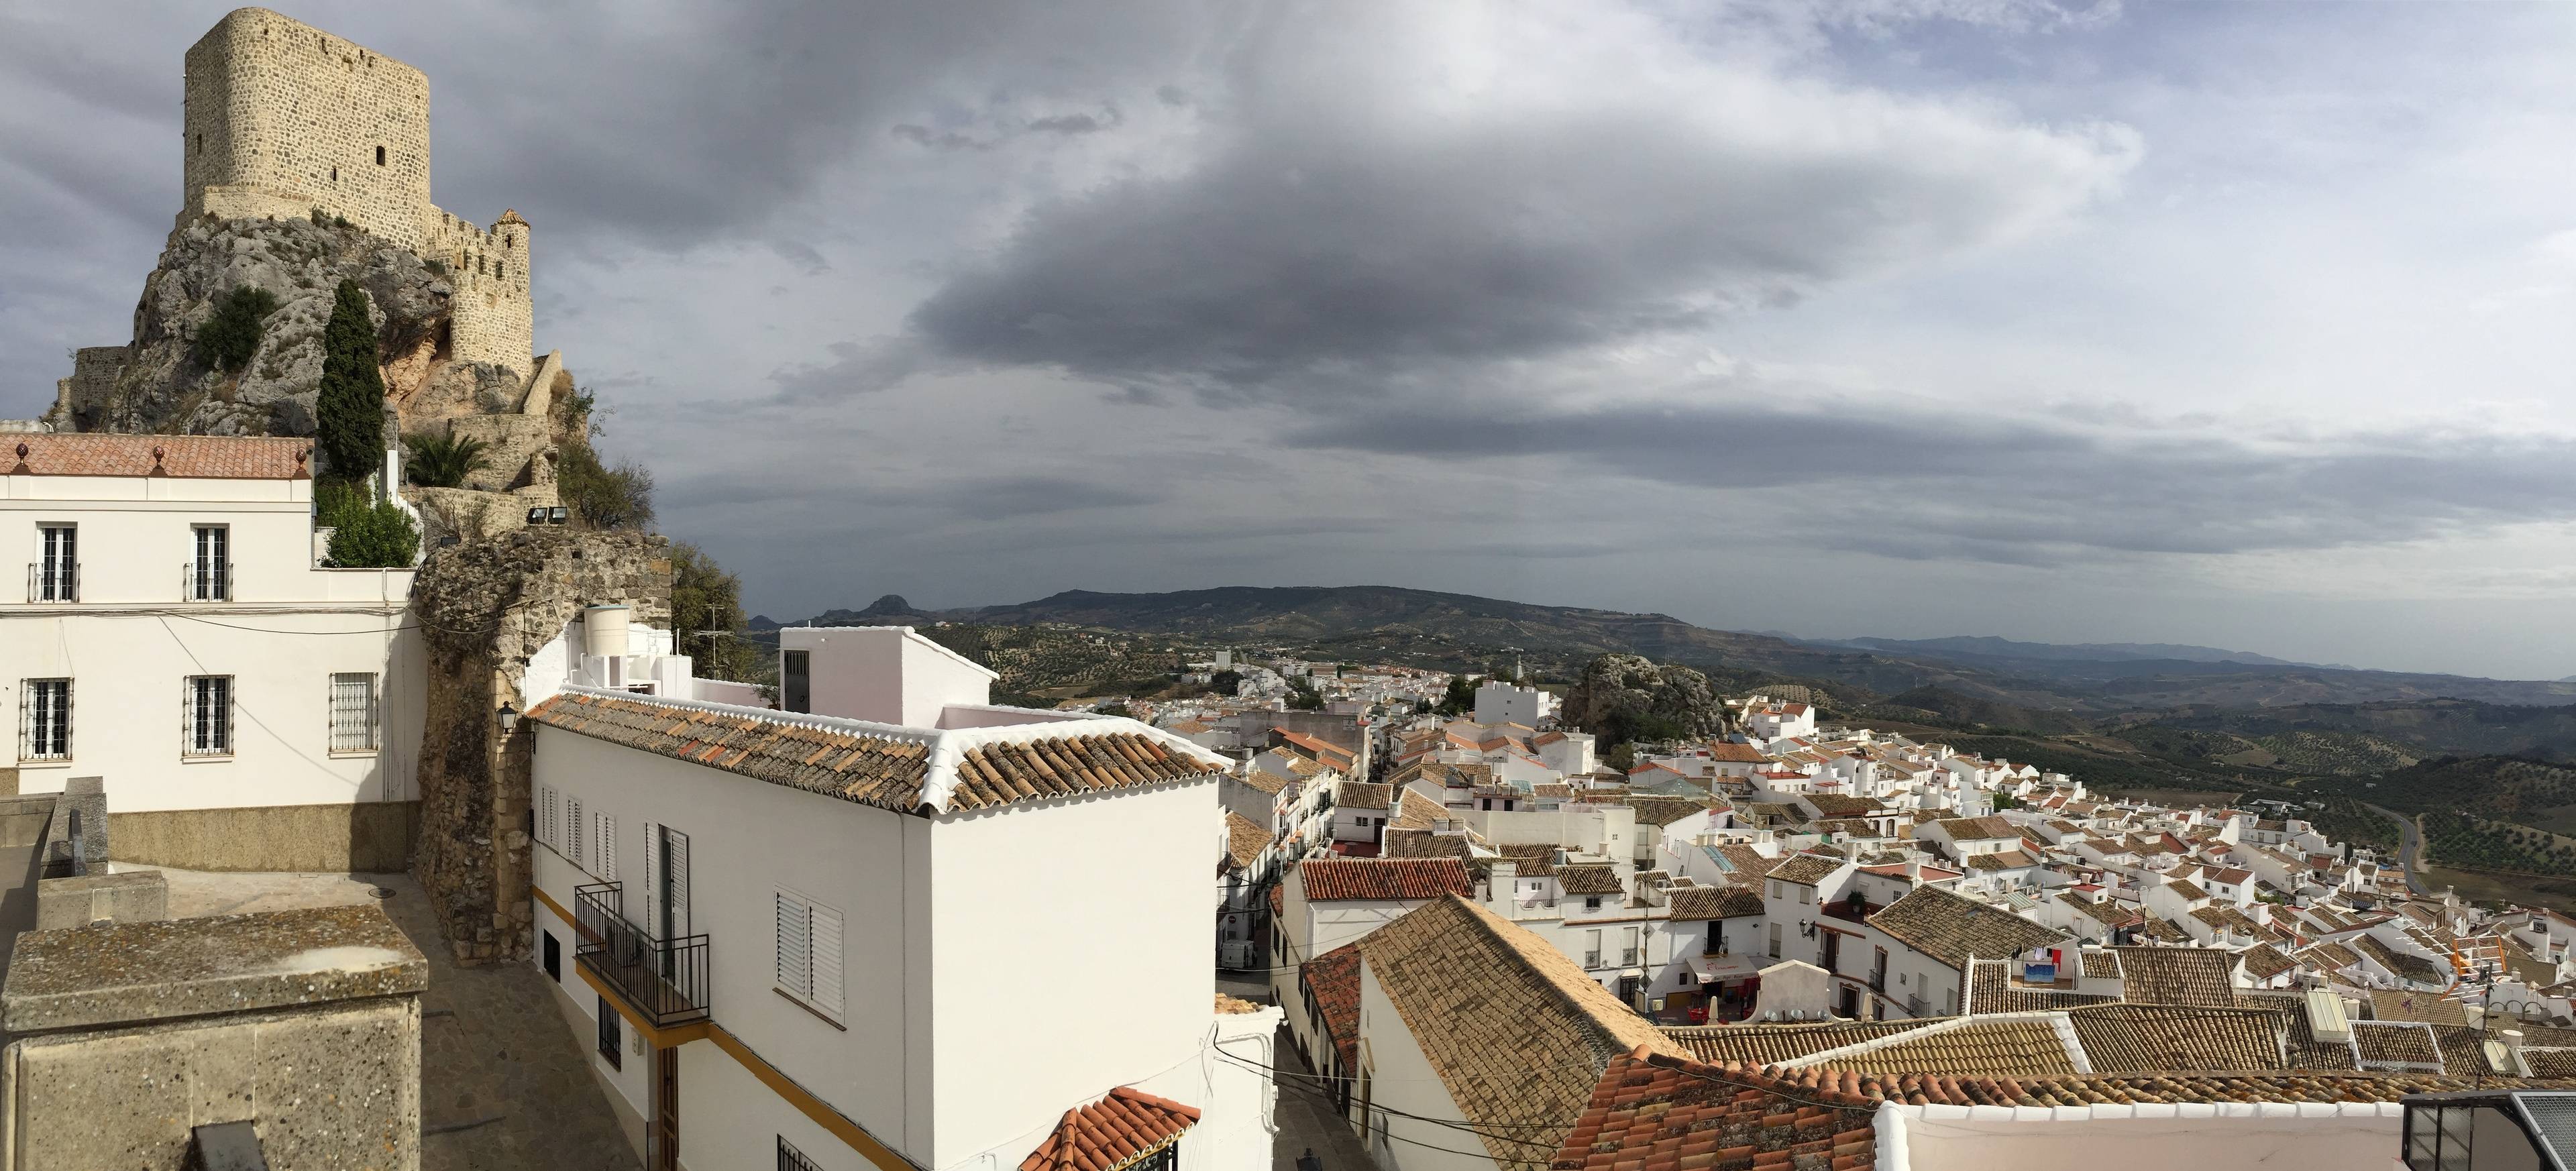 A Postcard view of Andalusia